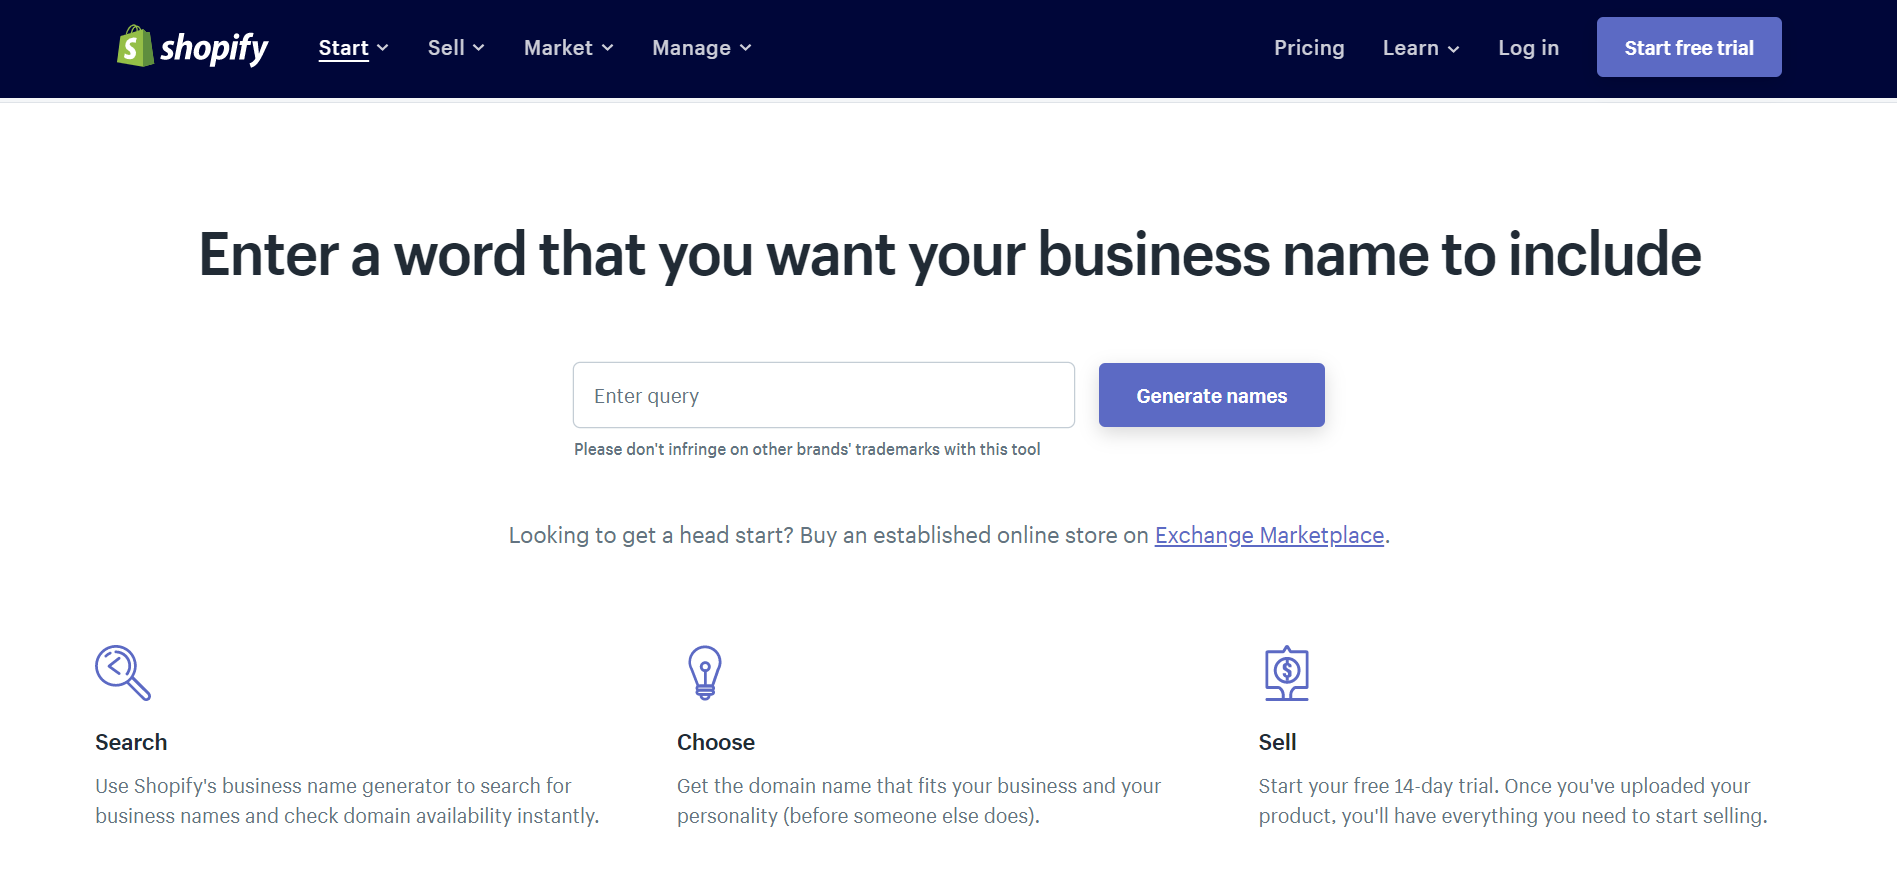 Best 10 Business Name Generators To Try In 2020